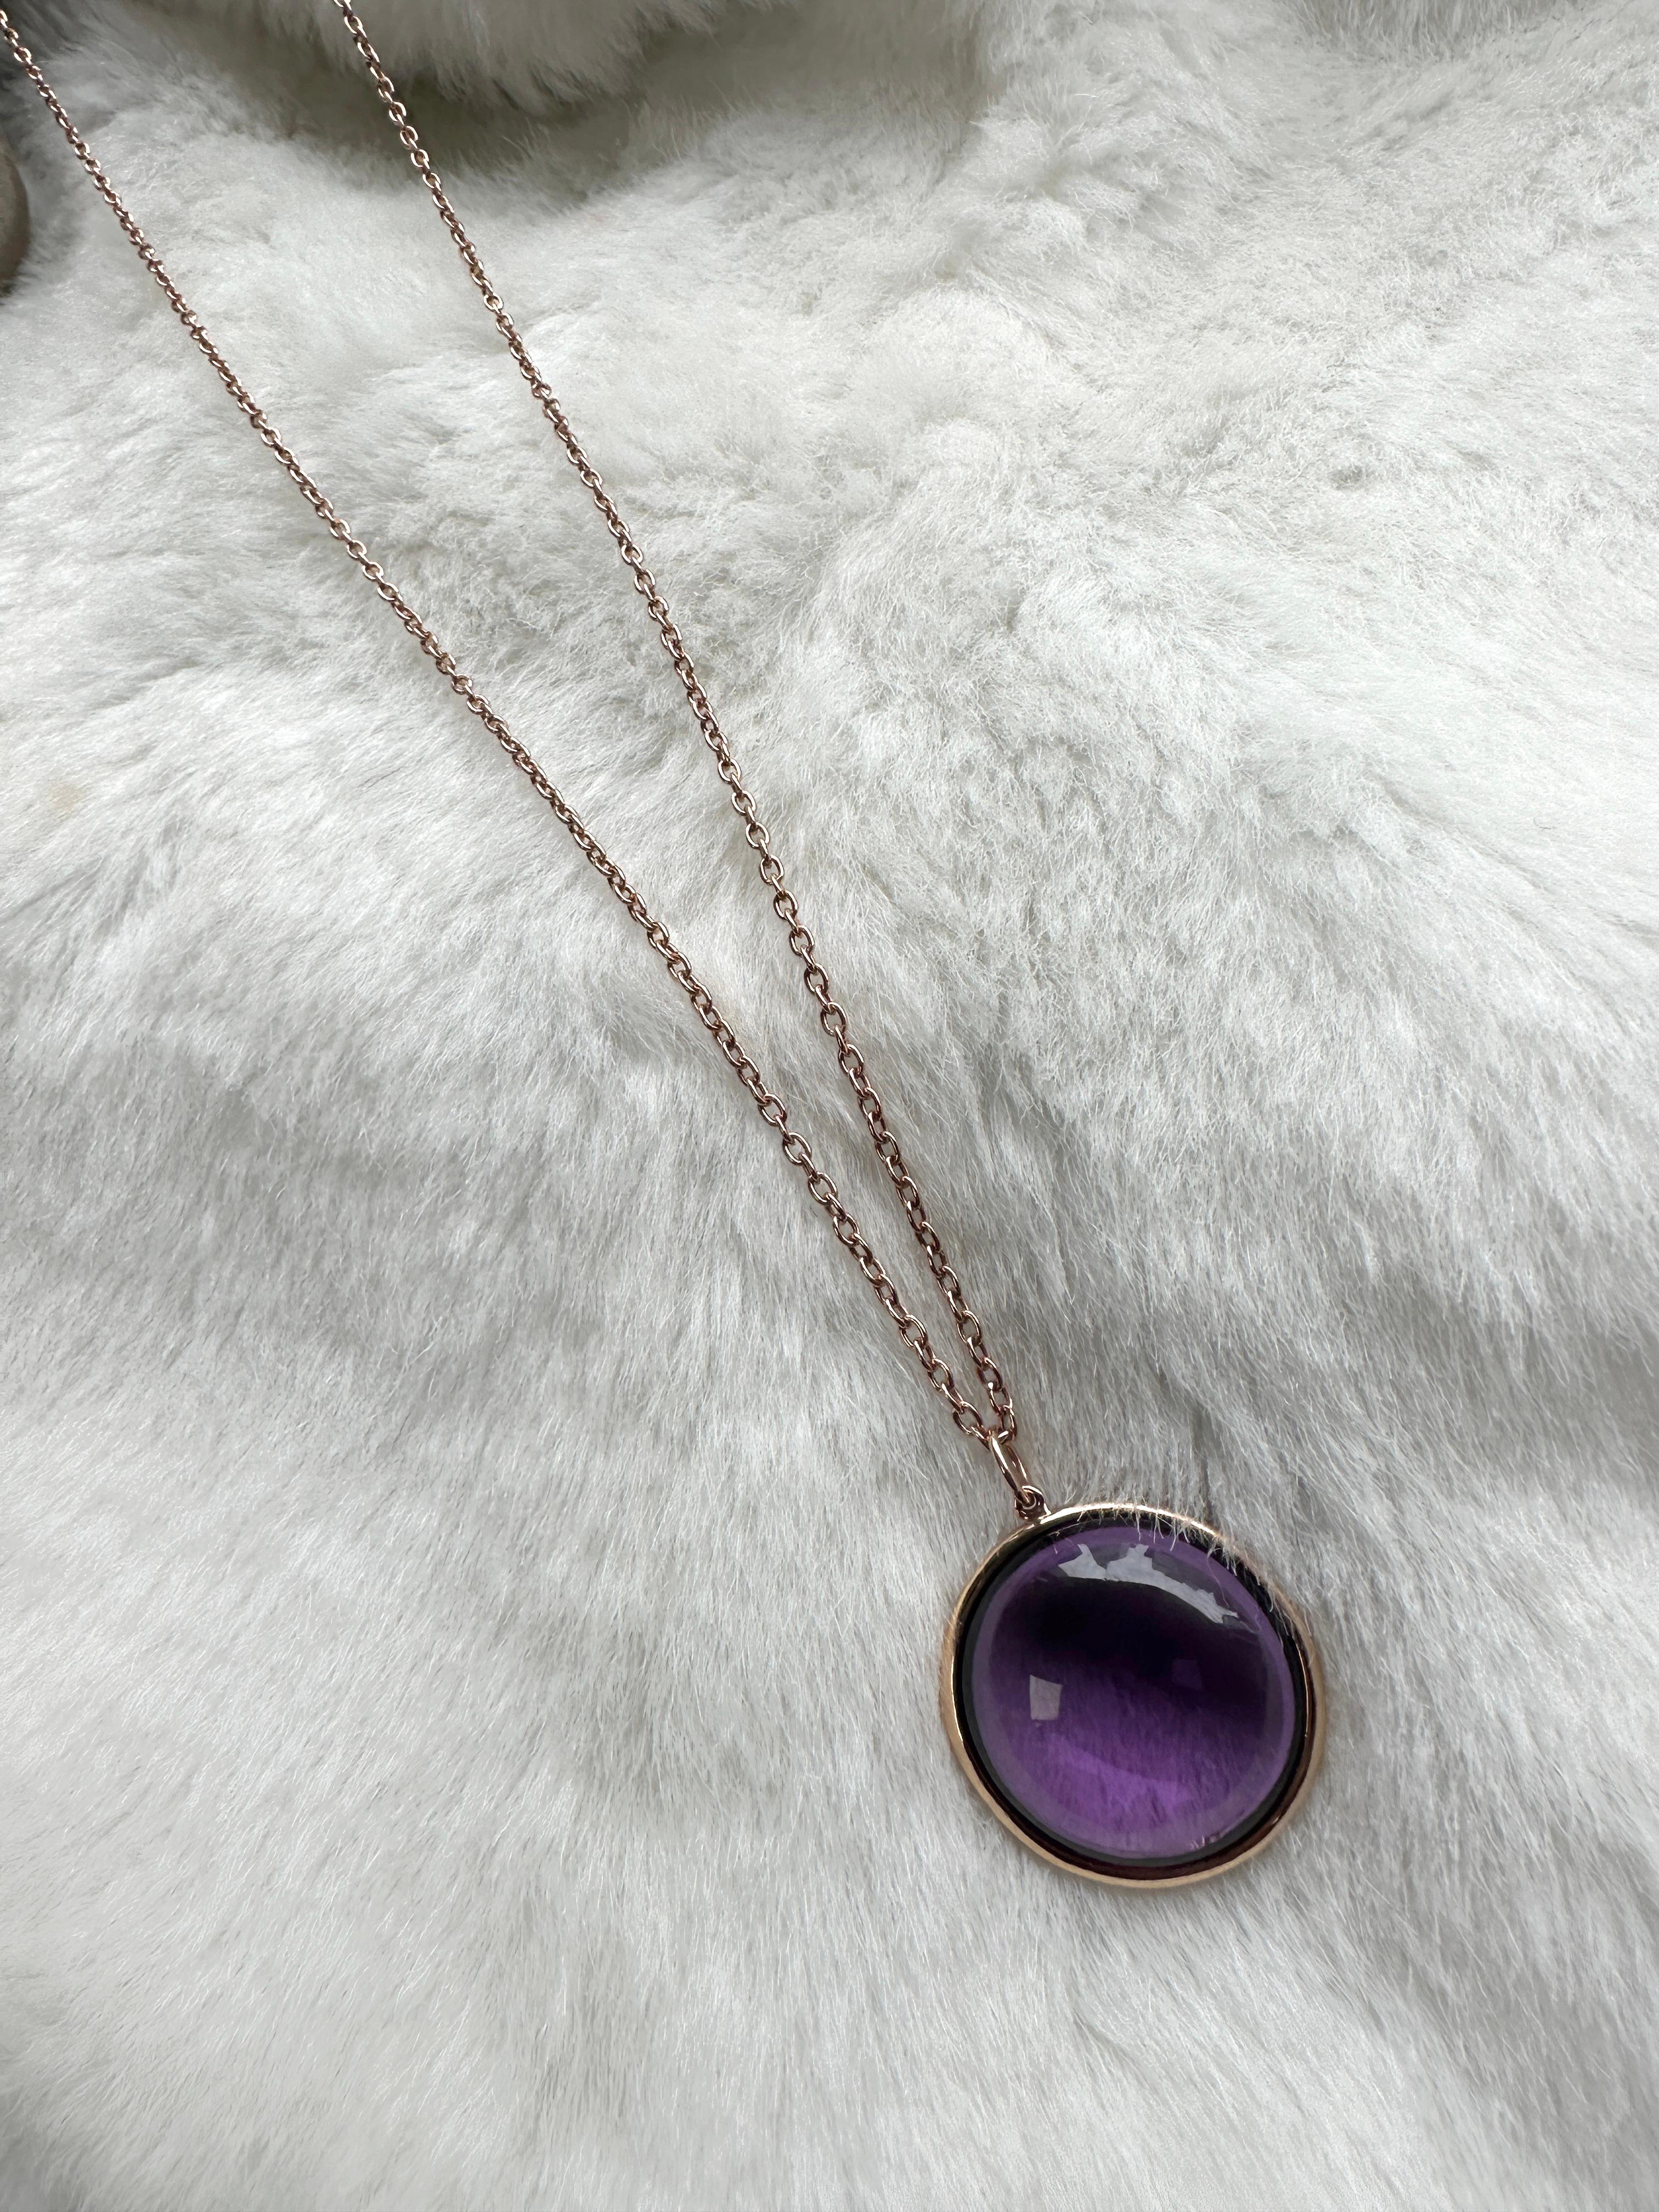 This Lilac Amethyst Round Disc Pendant is a stunning piece of jewelry from the 'Mischief' Collection, crafted in 18K rose gold. The pendant features a round-shaped lilac amethyst gemstone at the center. The lilac amethyst has a gorgeous light purple